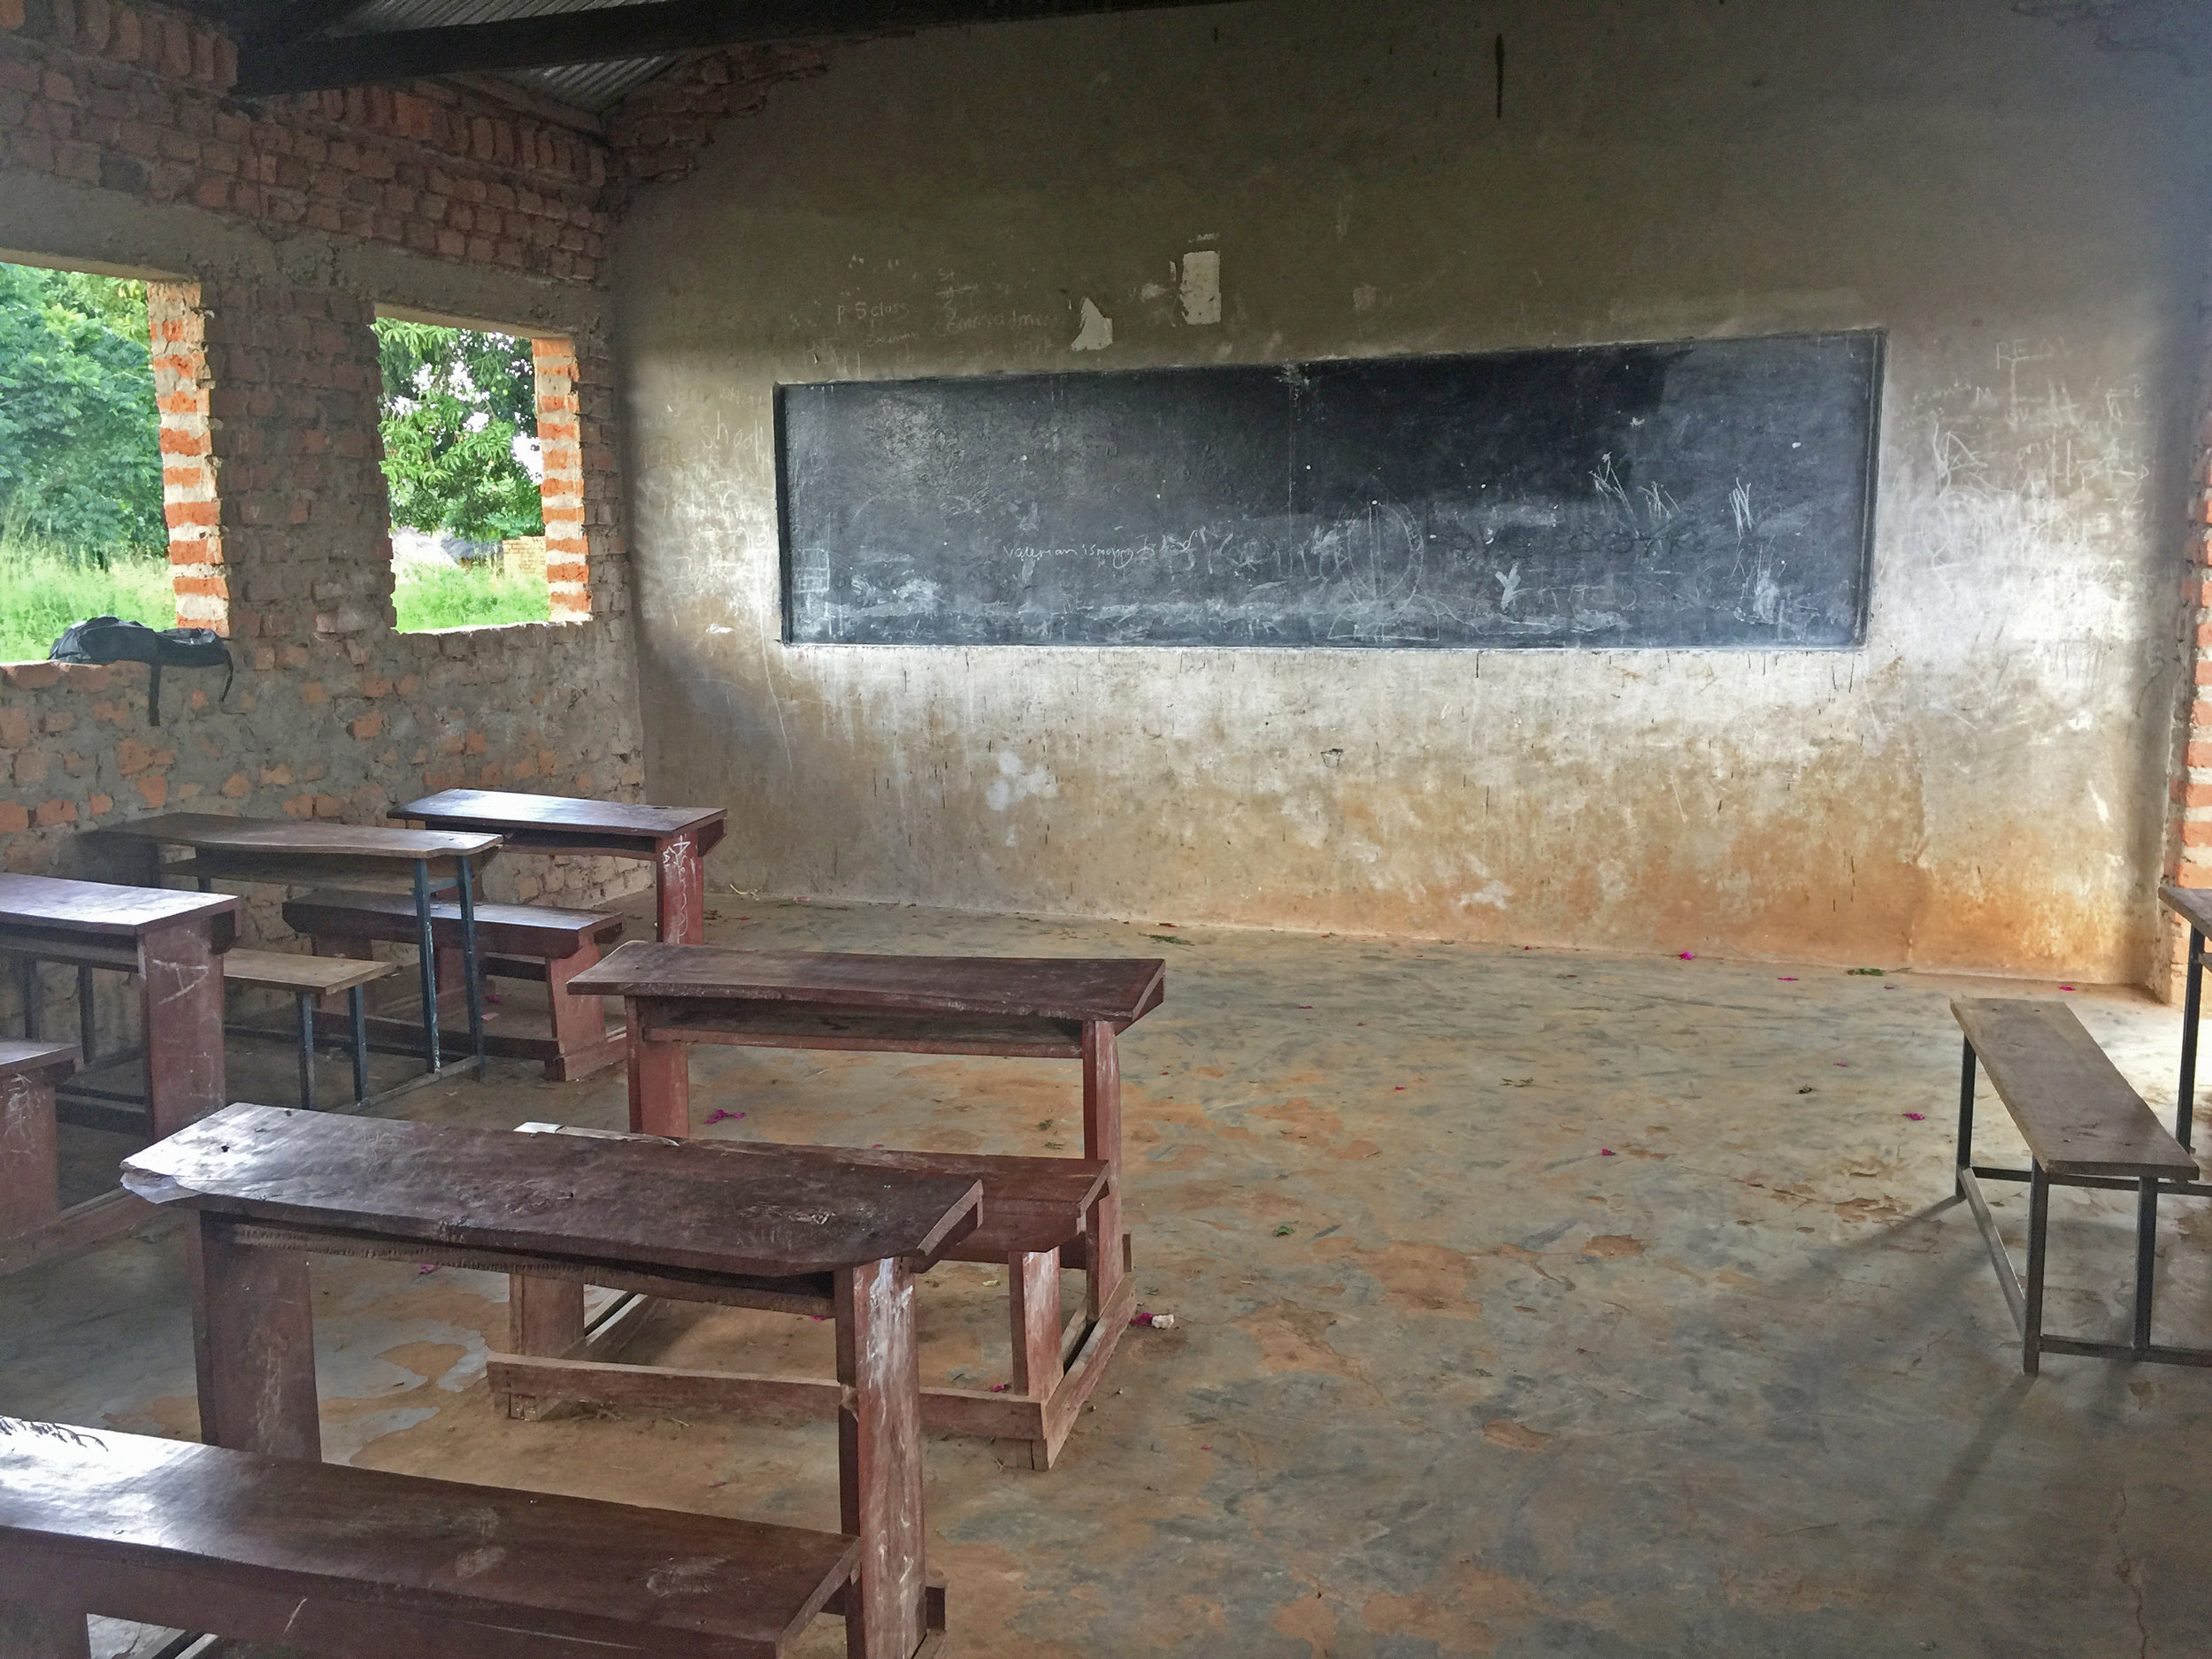 Incomplete classrooms